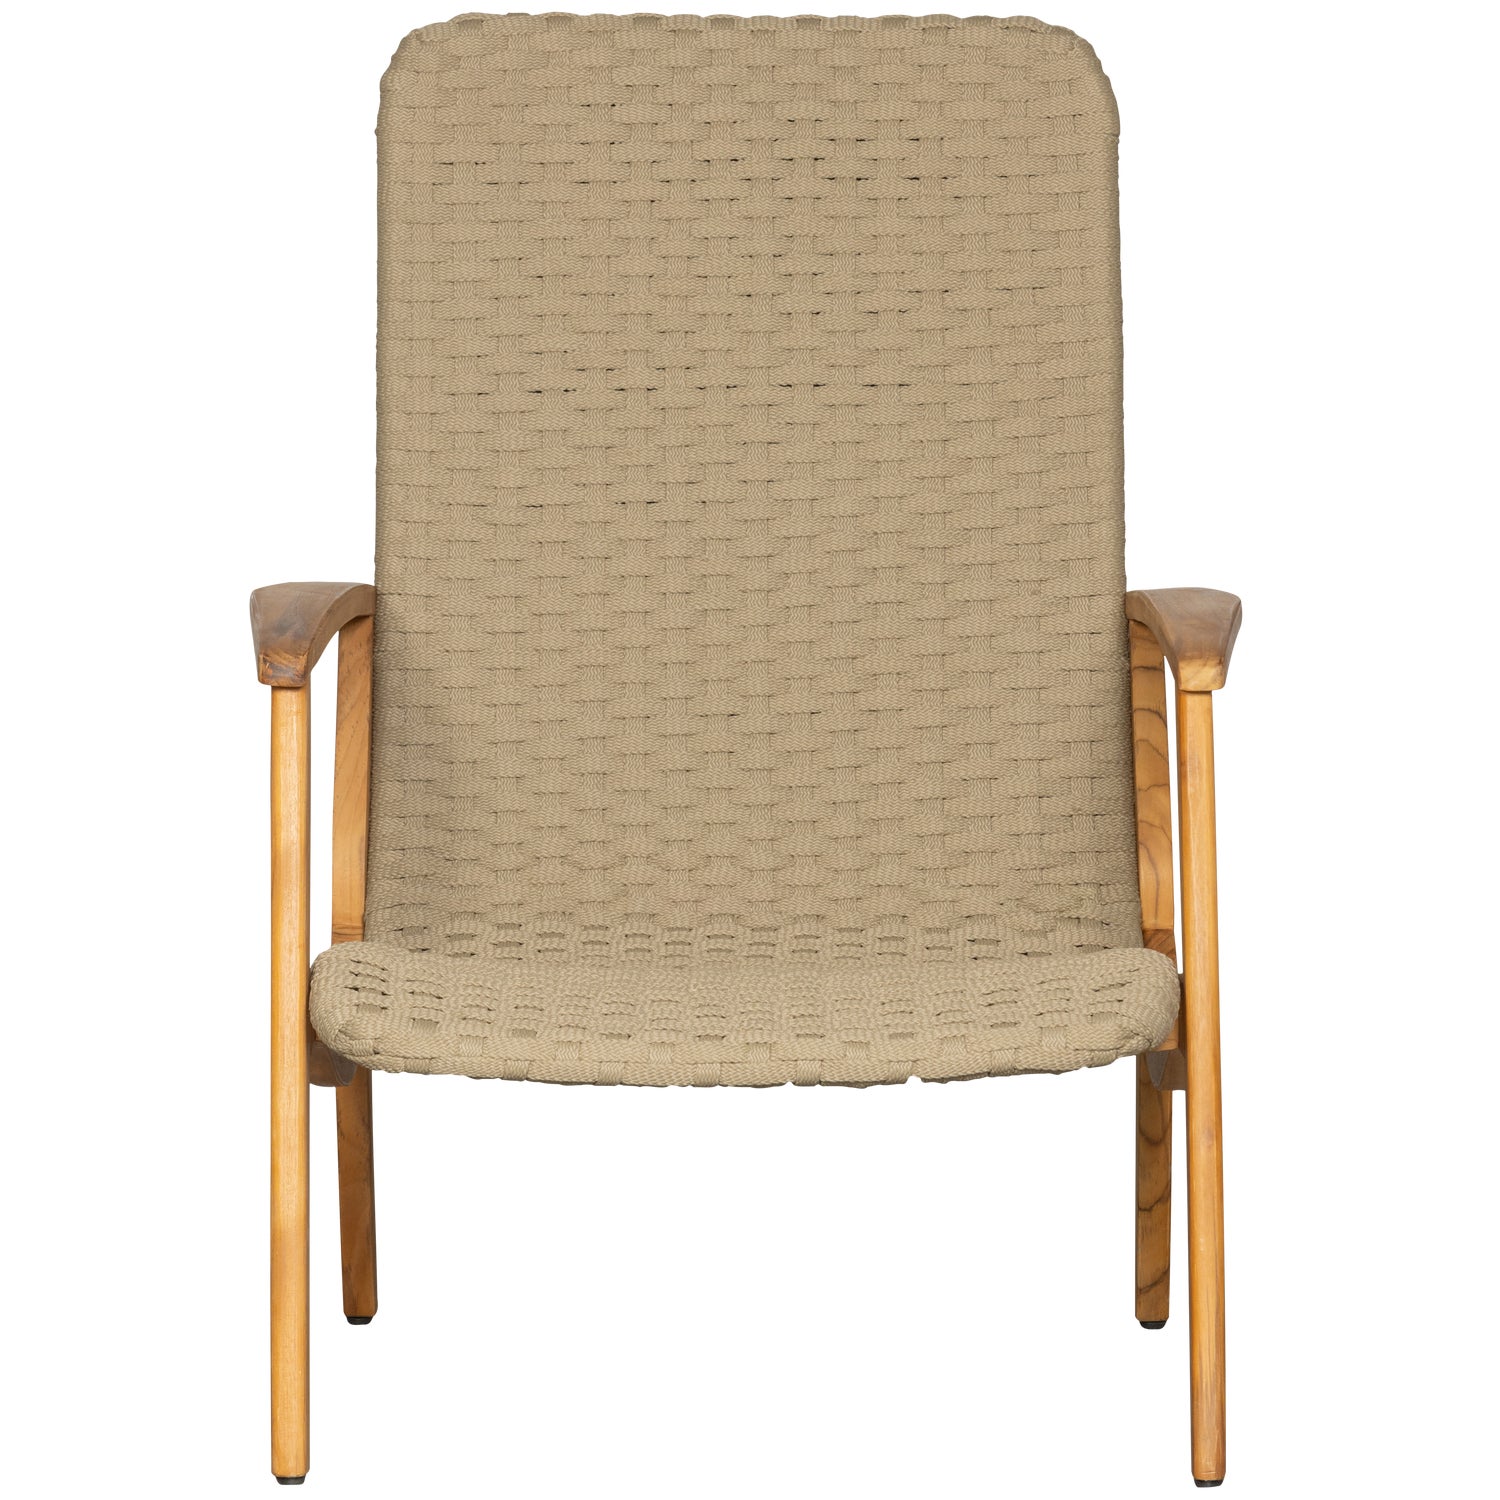 500003-G-01_VS_EXT_Stony_fauteuil_met_armleuning_touw_hout.png?auto=webp&format=png&width=1500&height=1500